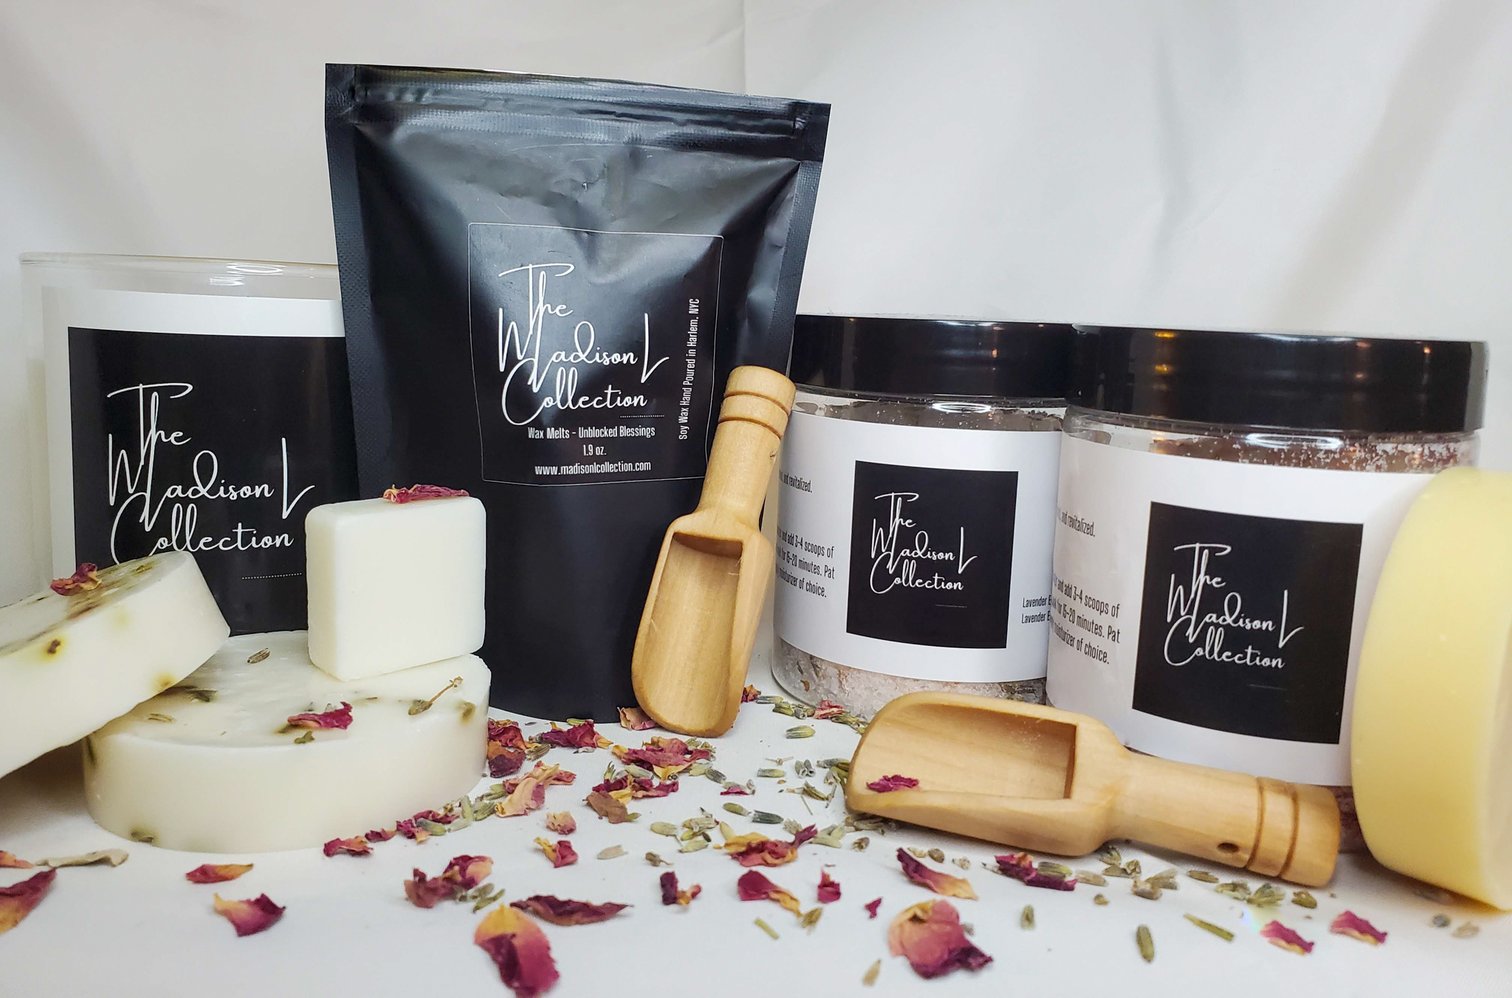 Madison L. Collection, product photography of bath salt, wax melts, foot soak and wooden spoon.